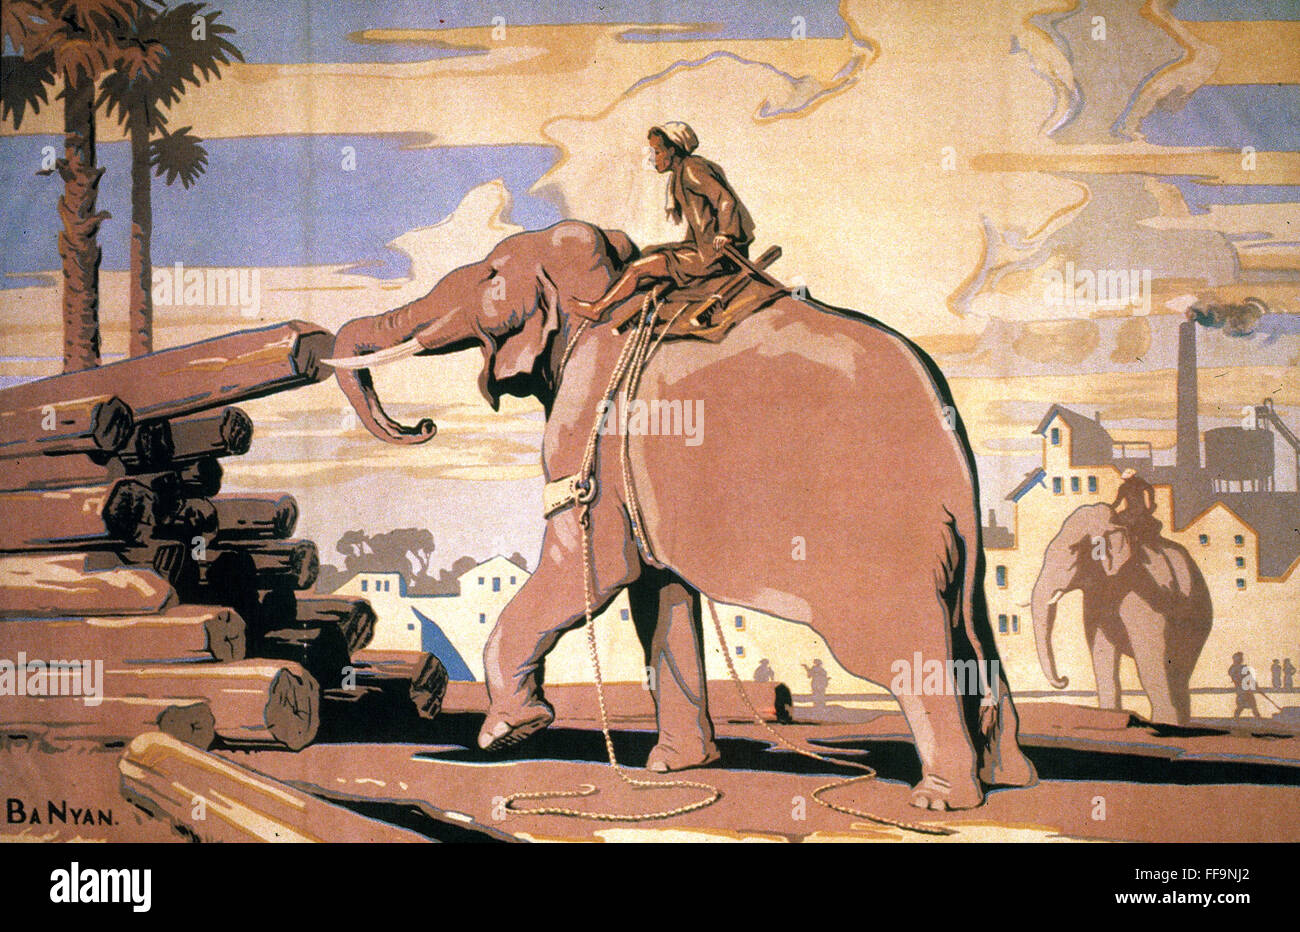 TIMBER STACKING IN BURMA. /nA Burmese worker stacking timber with an elephant. British Empire Marketing Board poster, 1928. Stock Photo